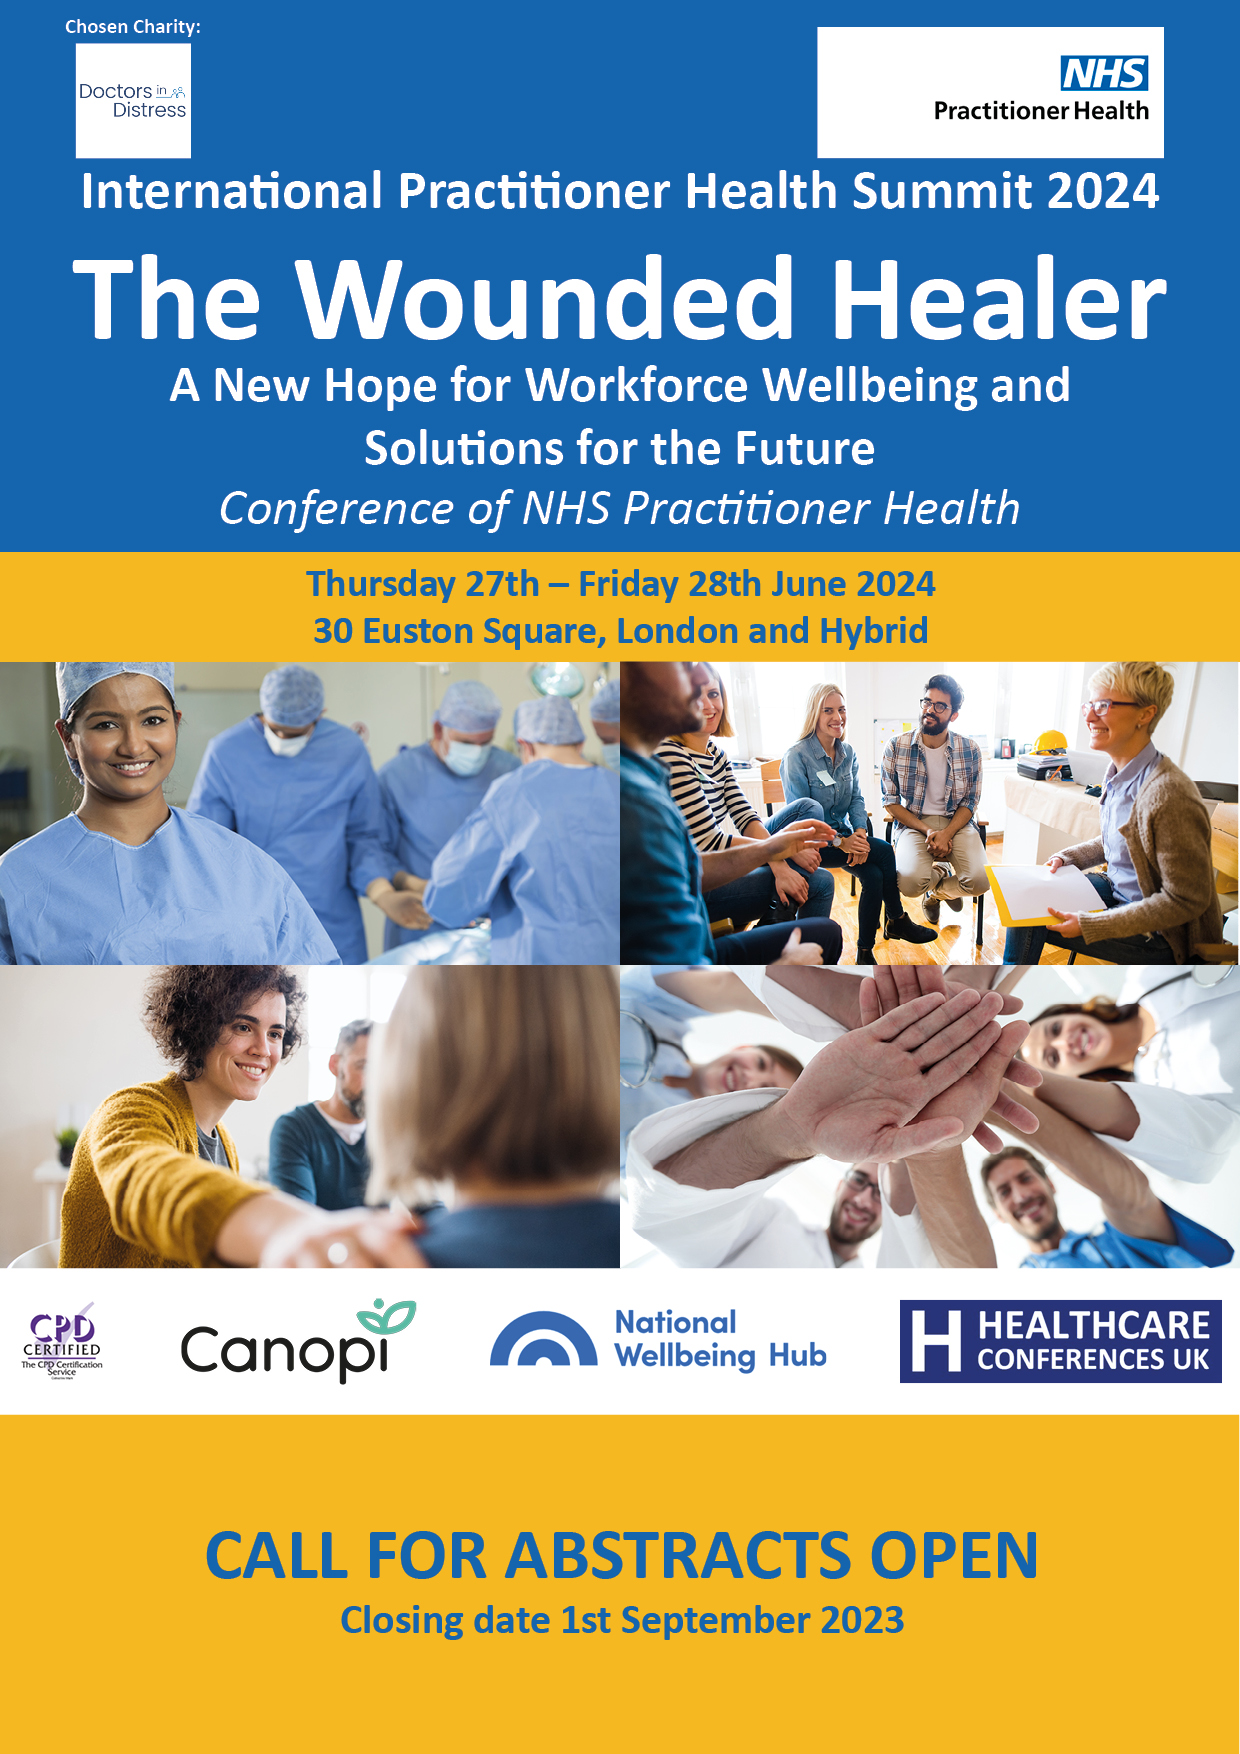 International Practitioner Health Summit 2024 The Wounded Healer